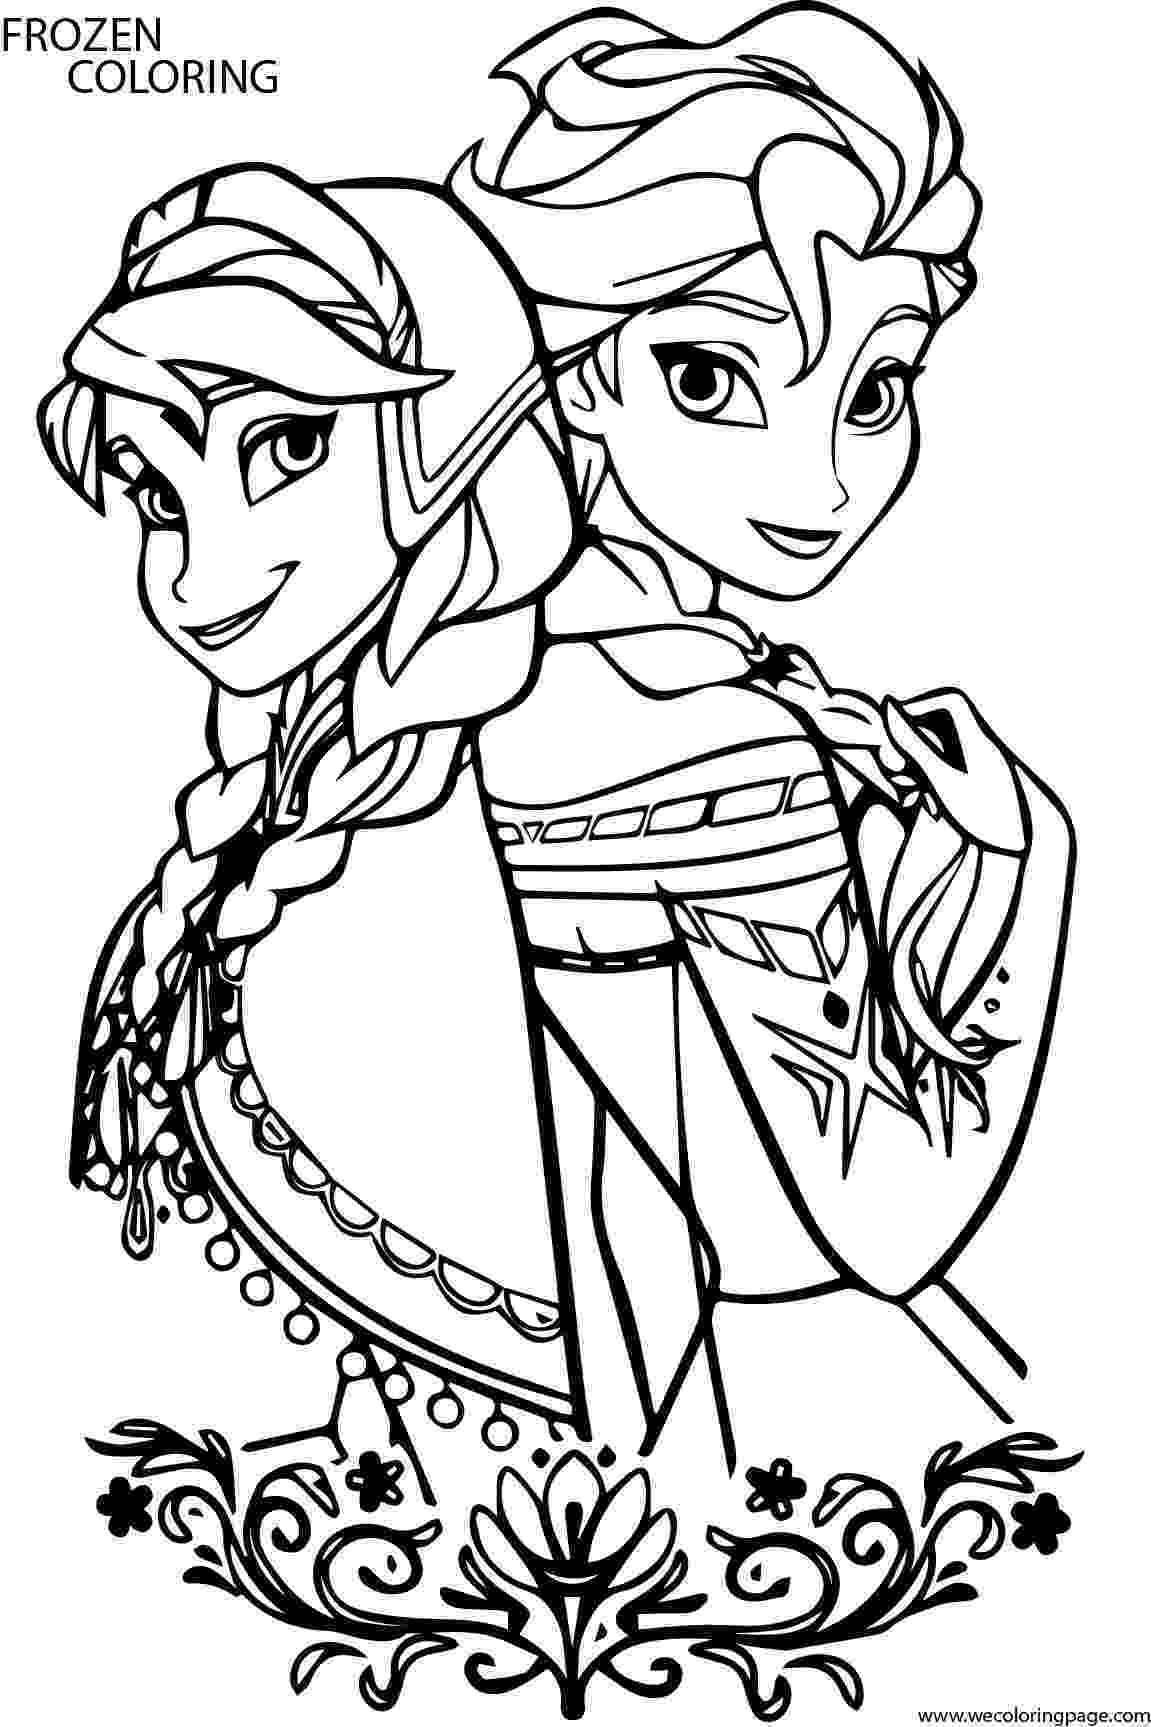 frozen printables coloring pages free printable frozen coloring pages for kids best printables frozen pages coloring 